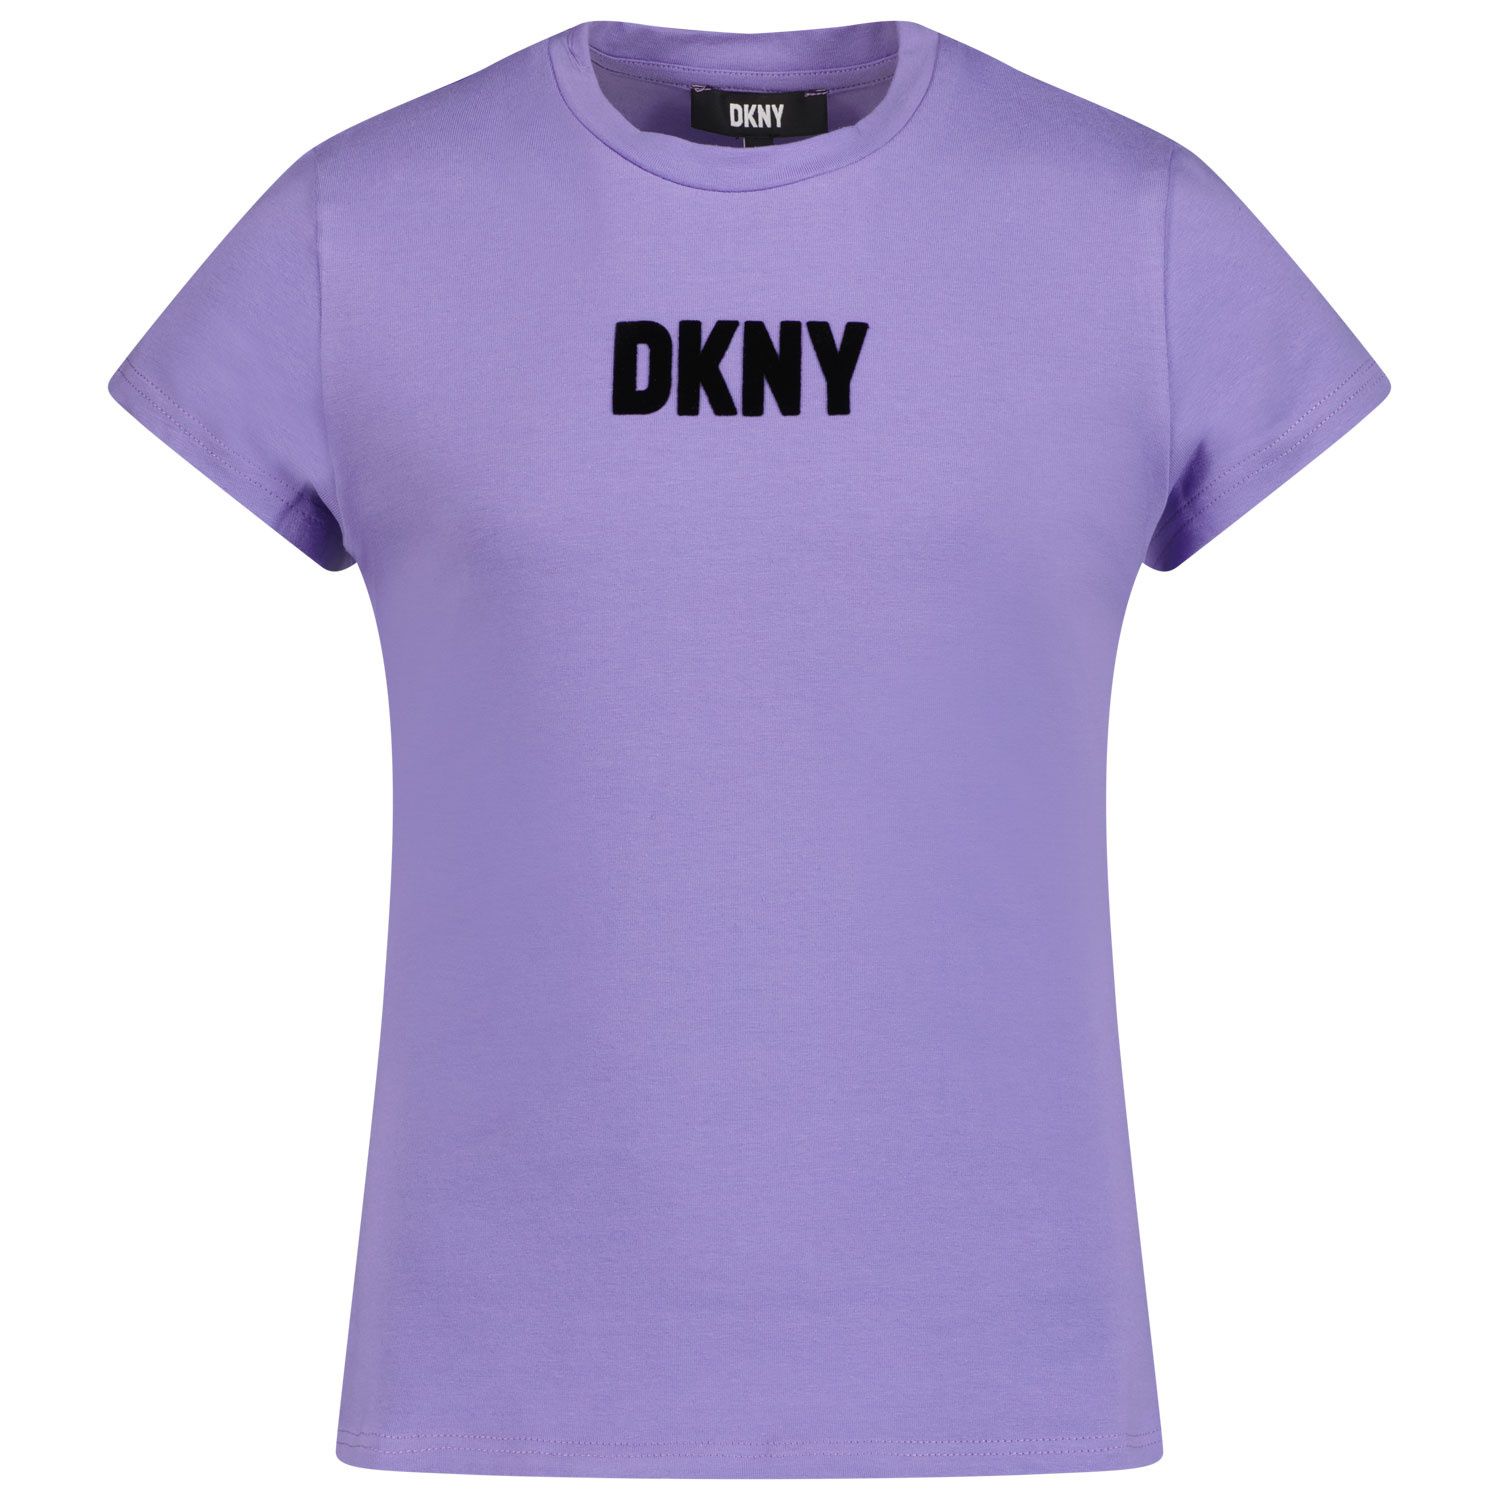 Picture of DKNY D35S29 kids t-shirt purple